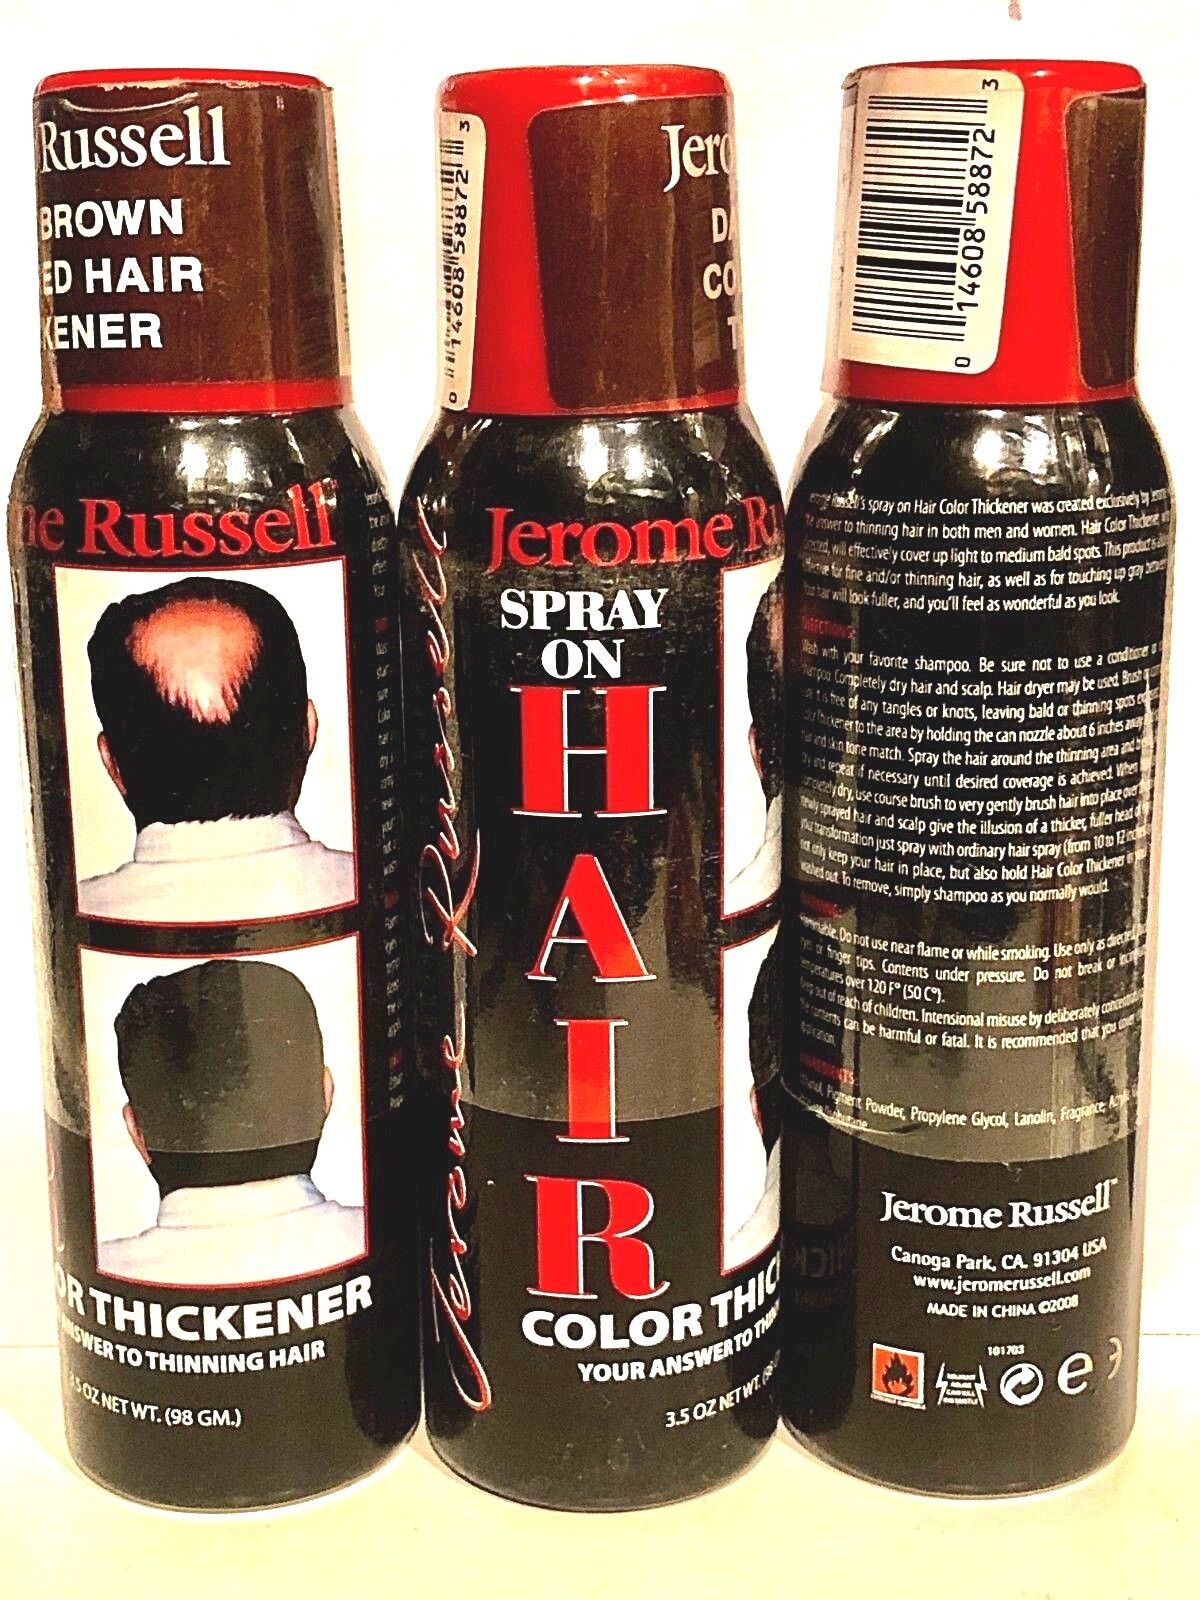 JEROME RUSSELL  SPRAY ON  HAIR COLOR THICKENER 3.5 OZ DARK BROWN 3 PC